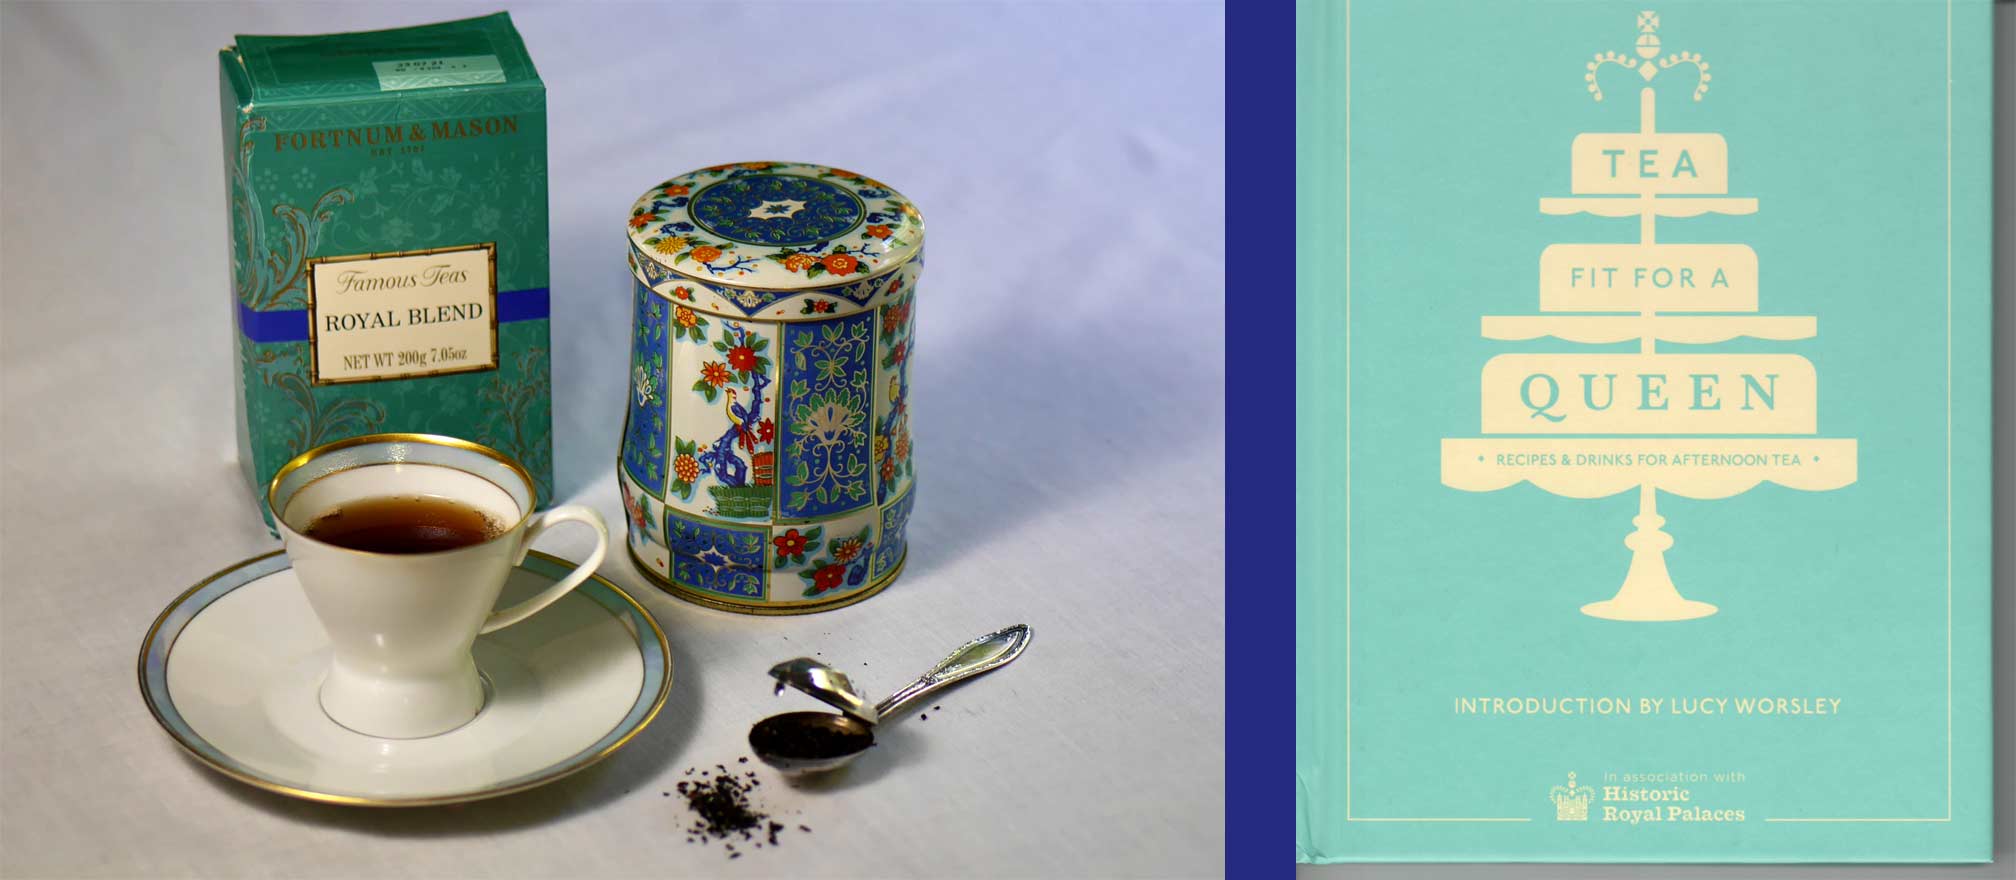 (left) Package of Royal Blend tea, cup of the brewed tea, tea caddy and infuser (right) book Tea Fit for a Queen